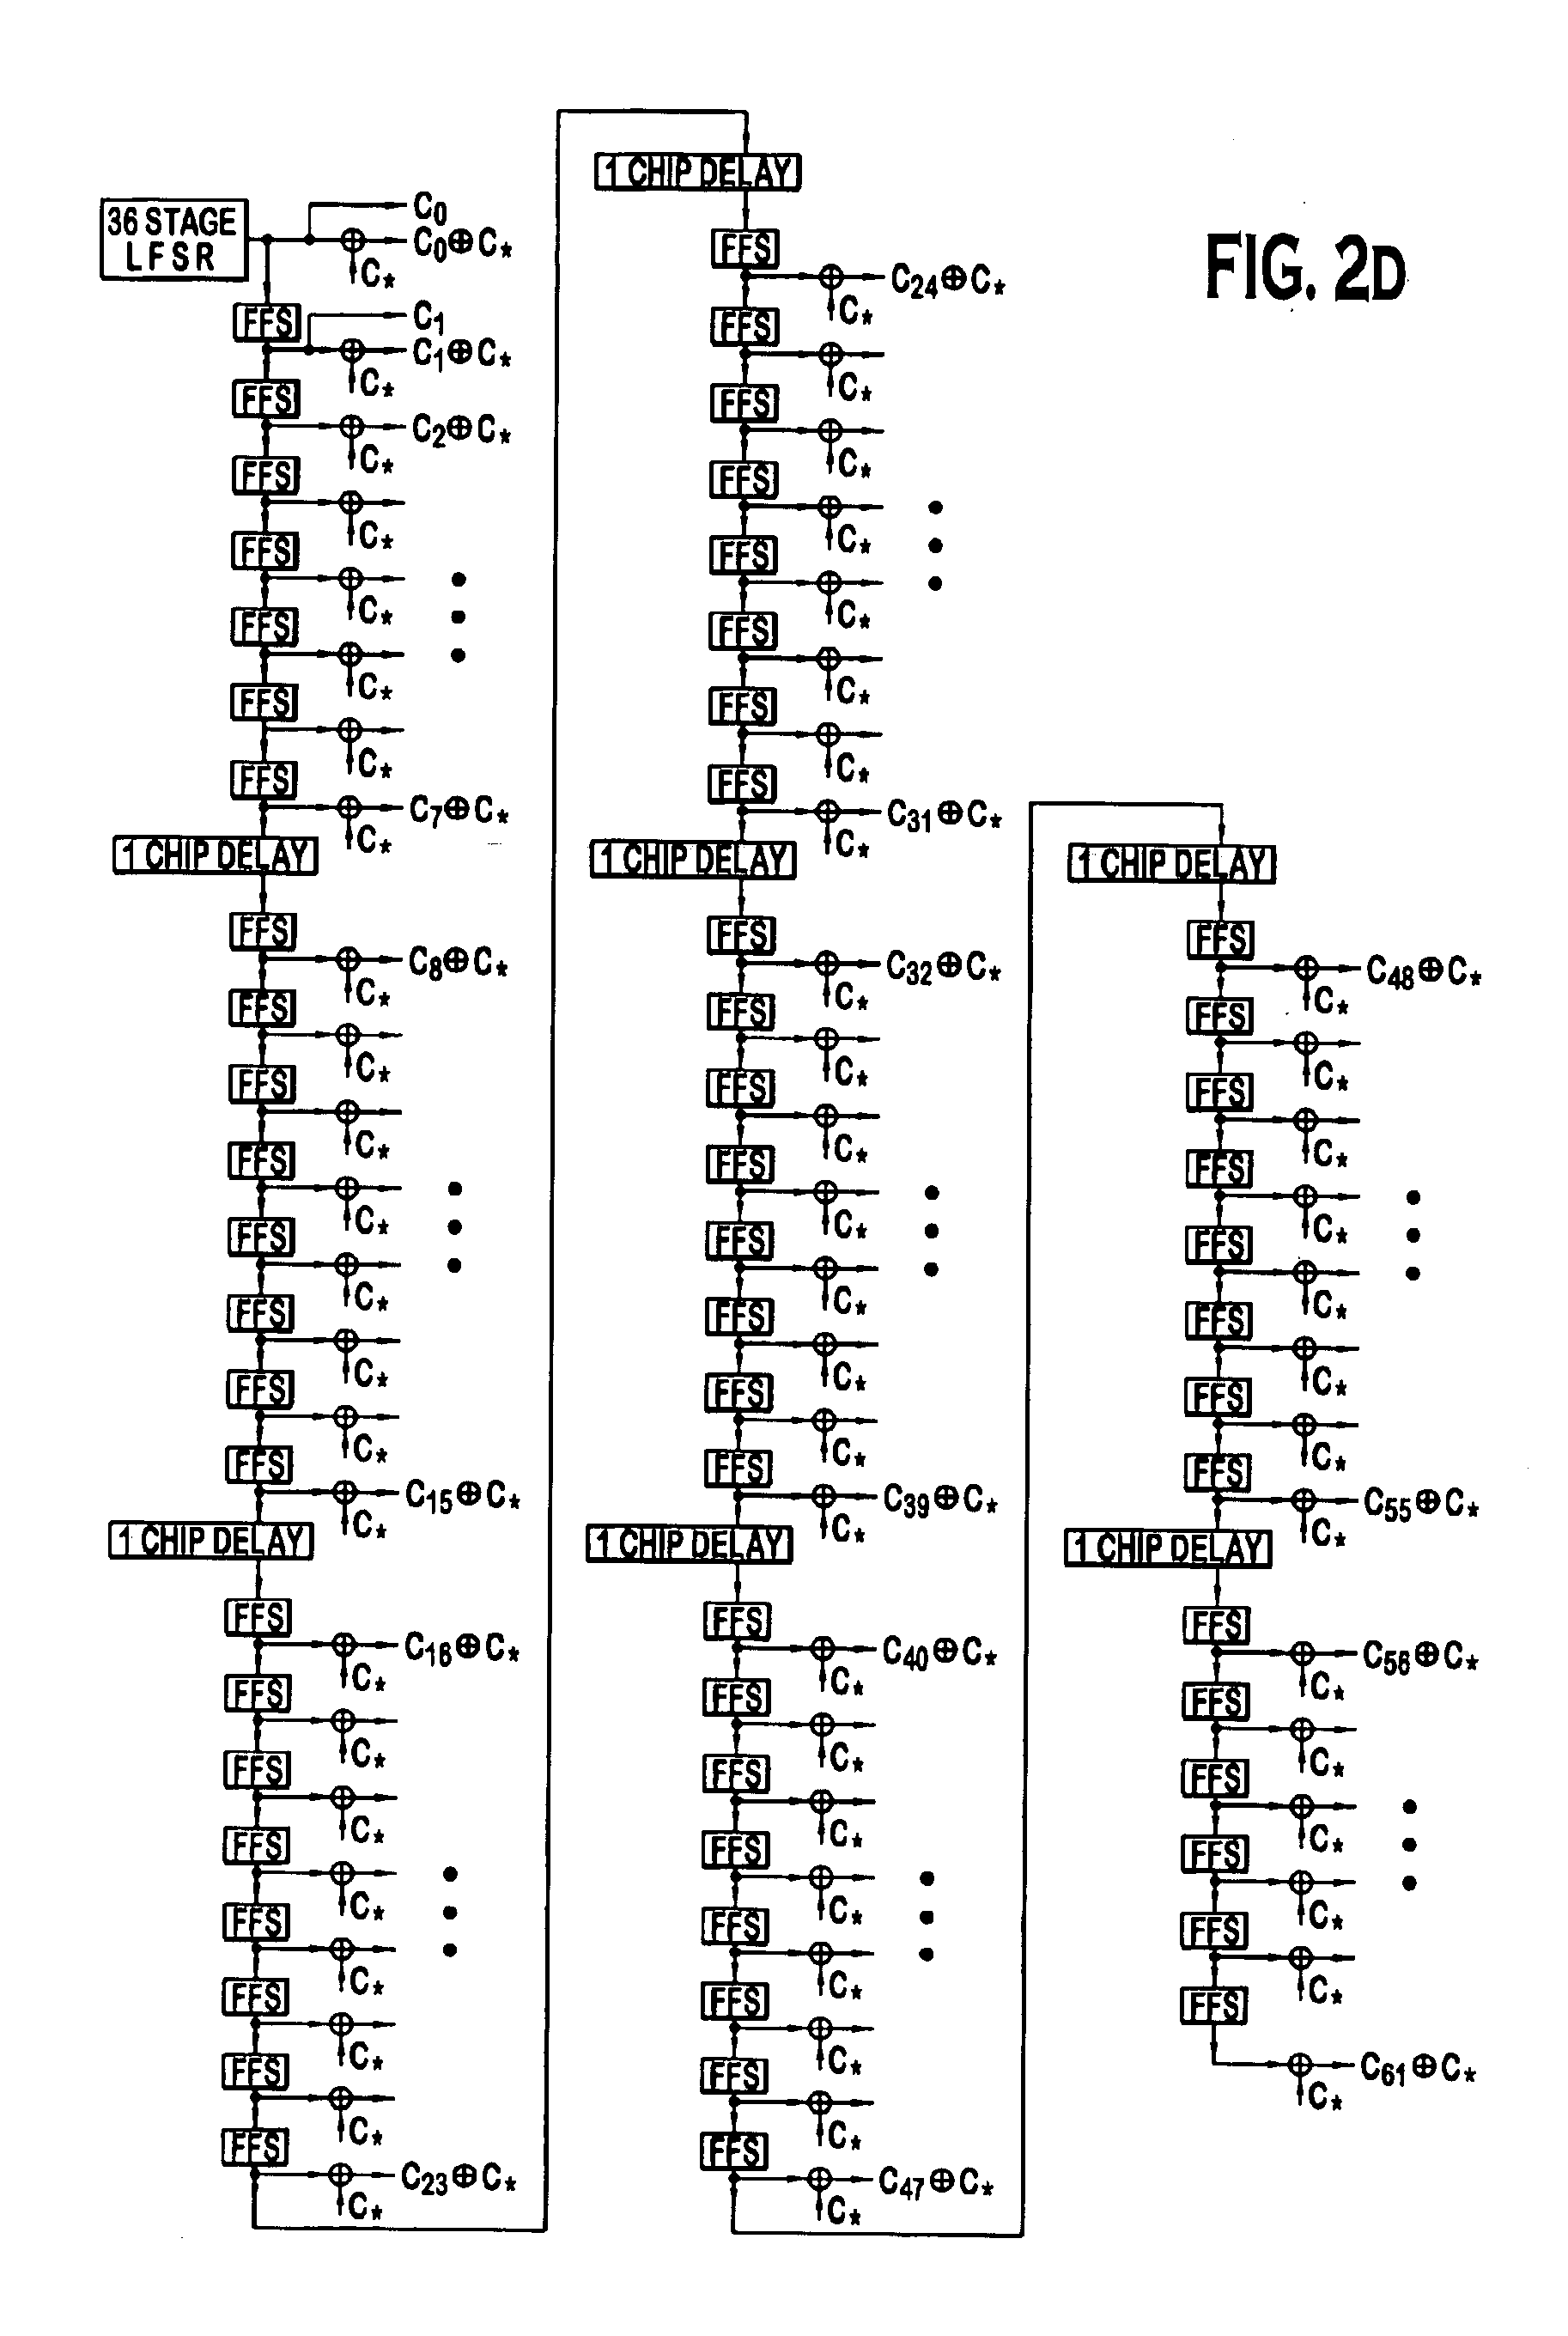 Apparatus for initial power control for spread-spectrum communications